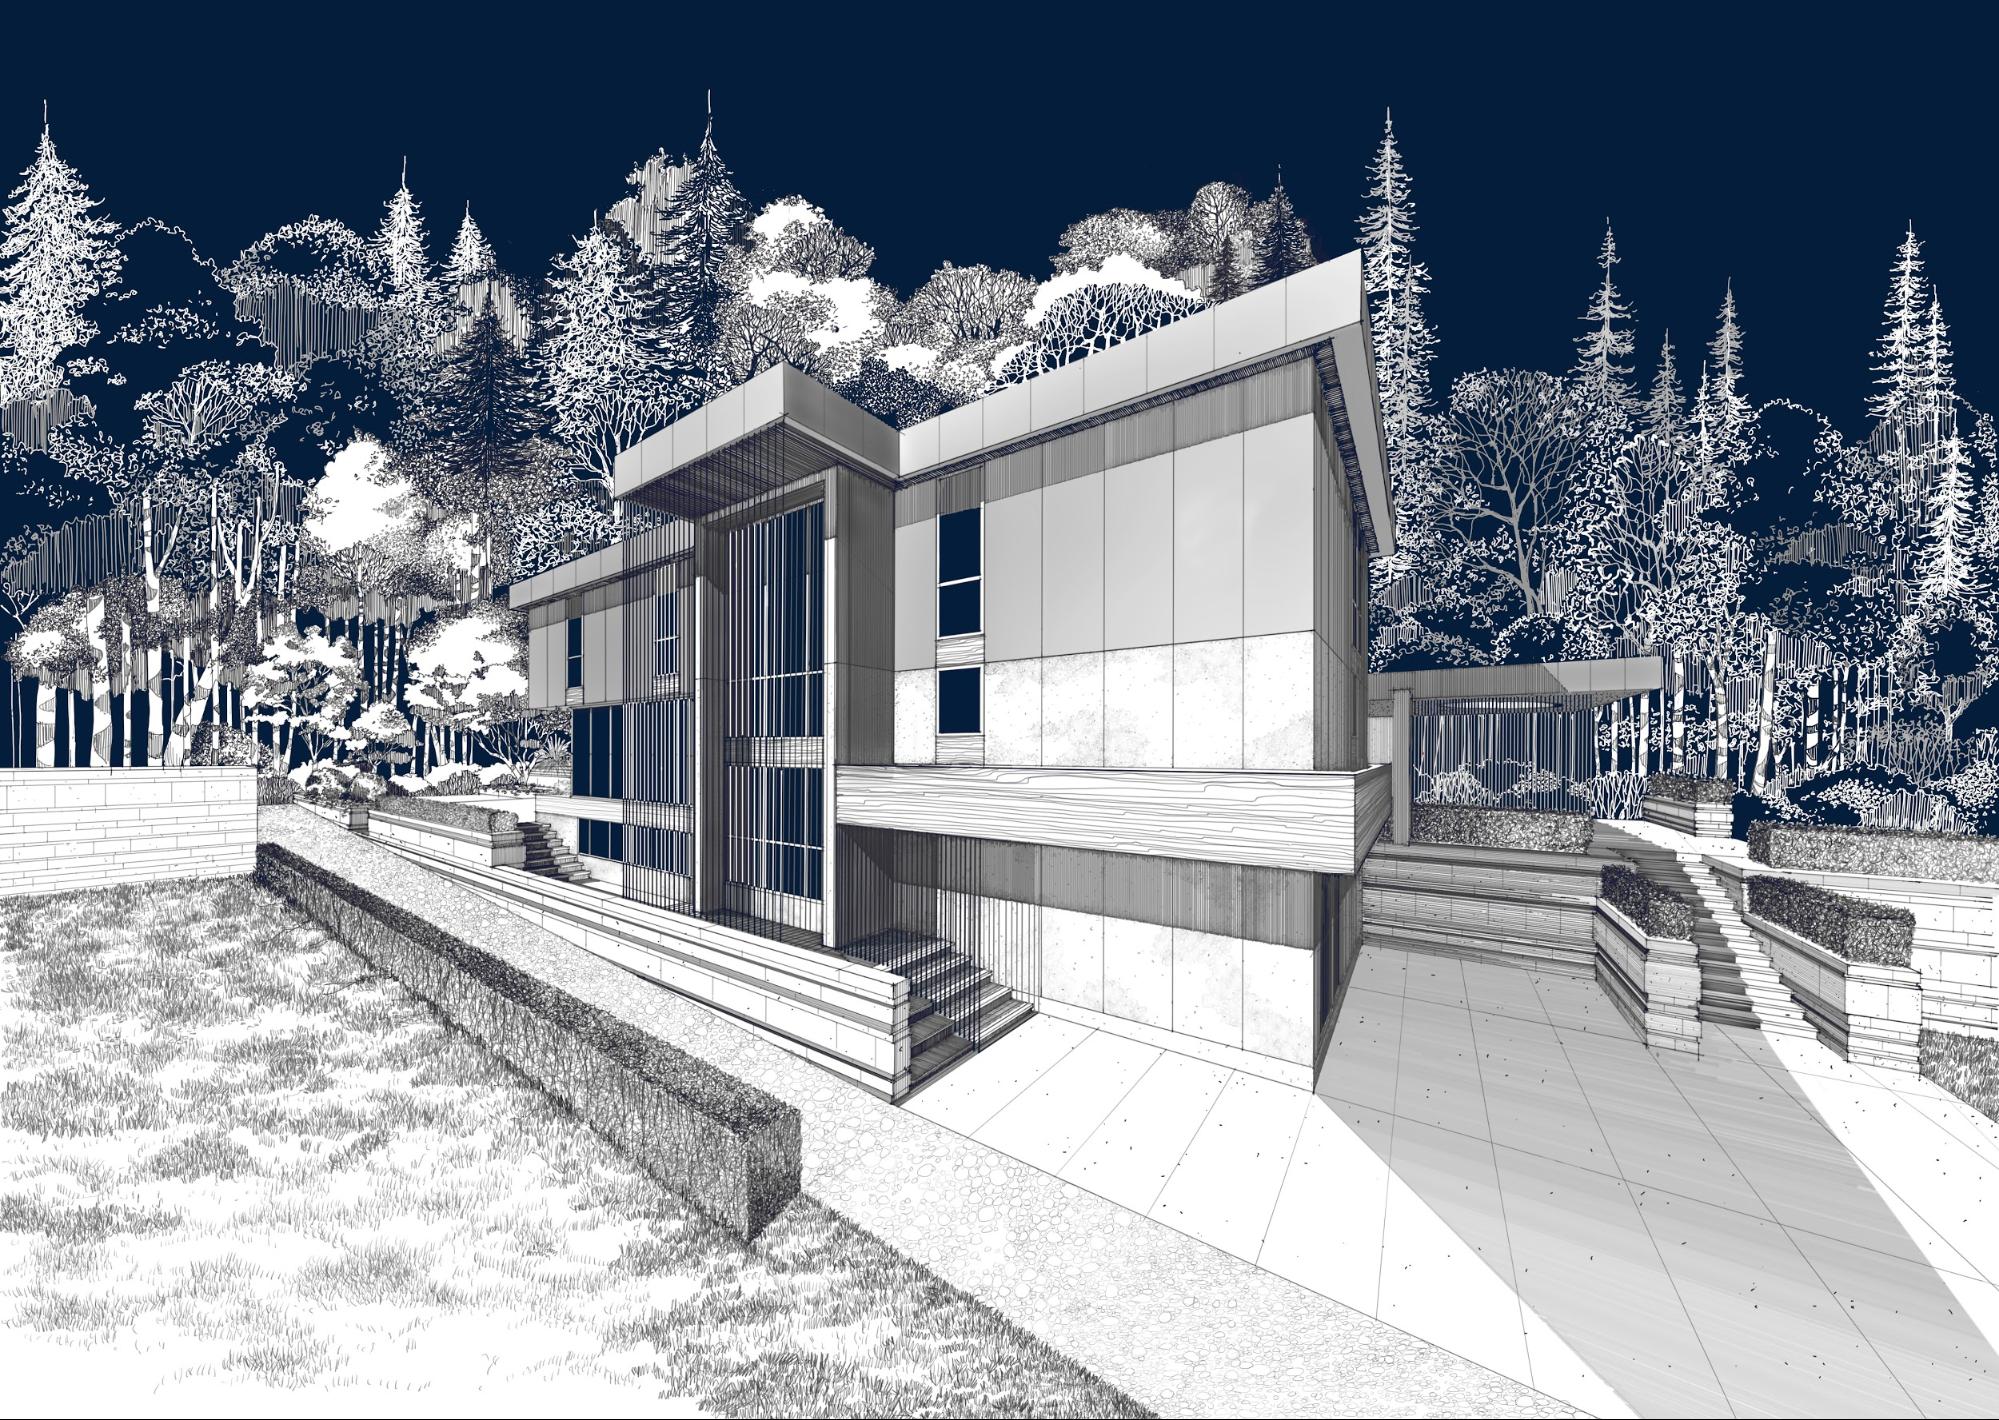 A rendering image of a beautiful custom home designed by FrankFranco Architects on their Woodland Ridge house project.